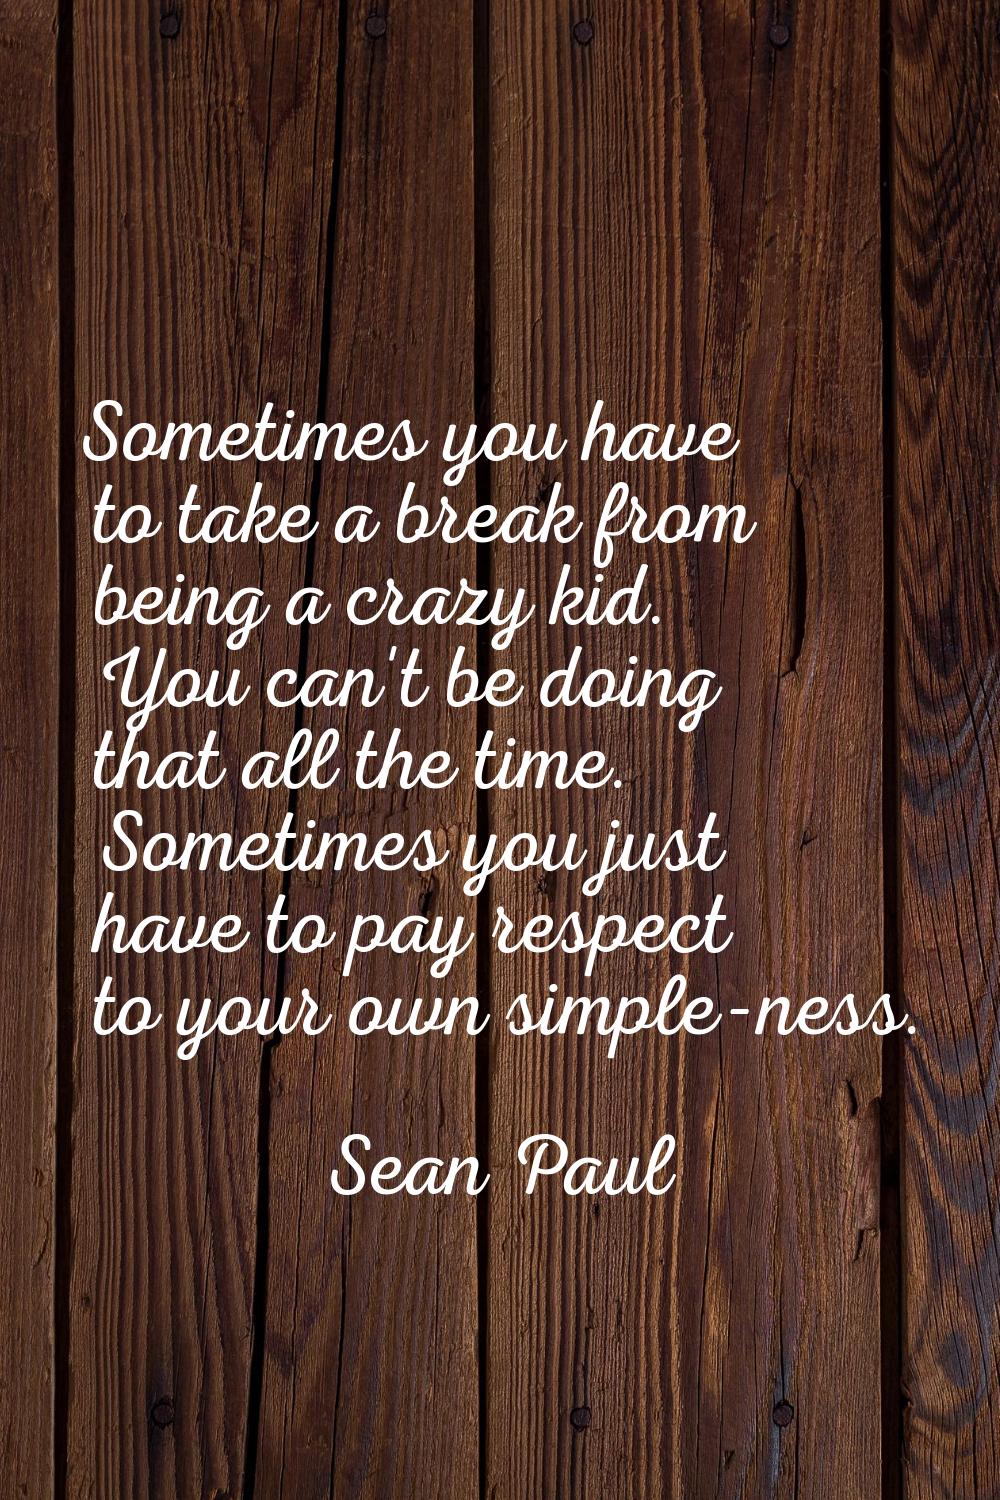 Sometimes you have to take a break from being a crazy kid. You can't be doing that all the time. So